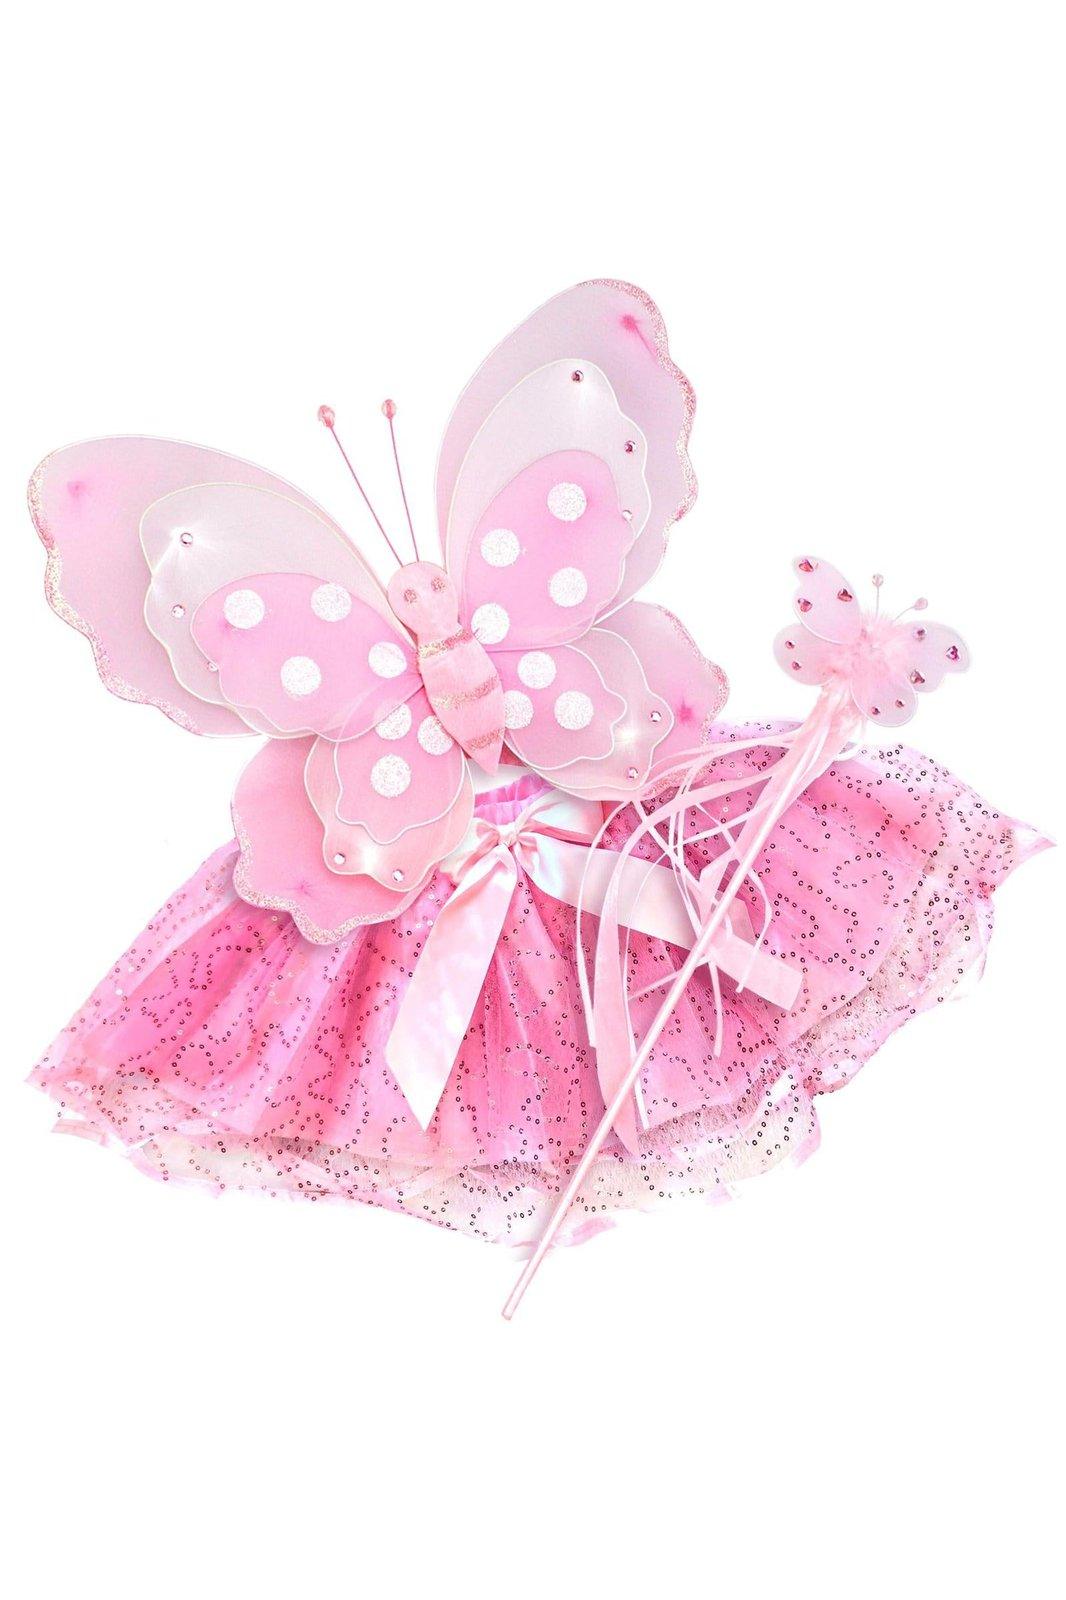 Girls Pink Butterfly Costume Fairy Wing Set with Sparkle